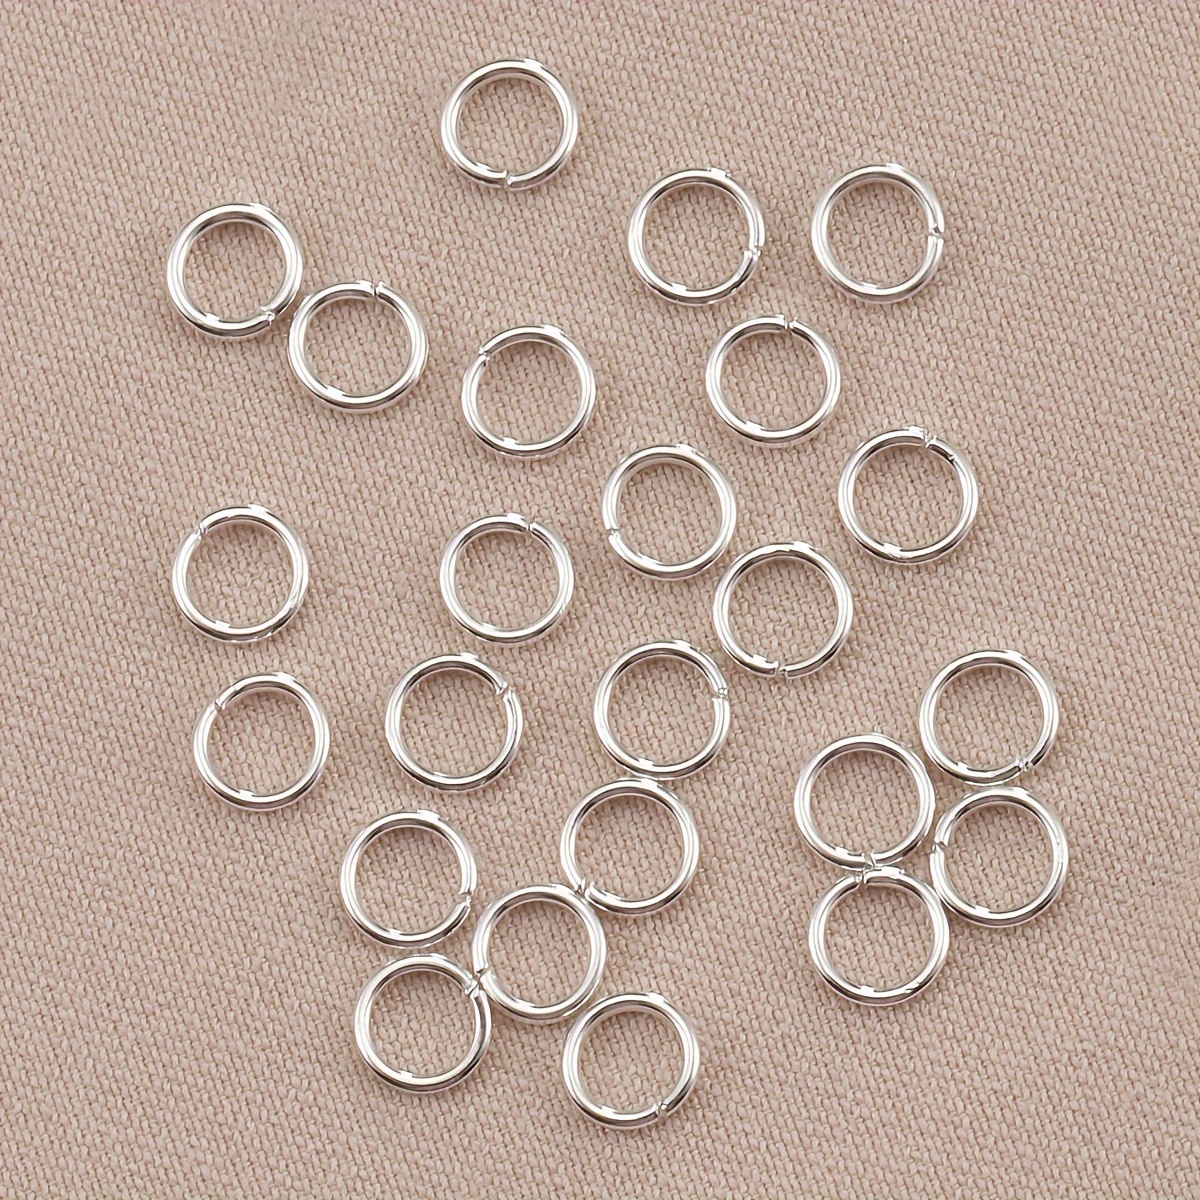 200-50pcs Stainless Steel Gold Silver Color Open Jump Rings Split